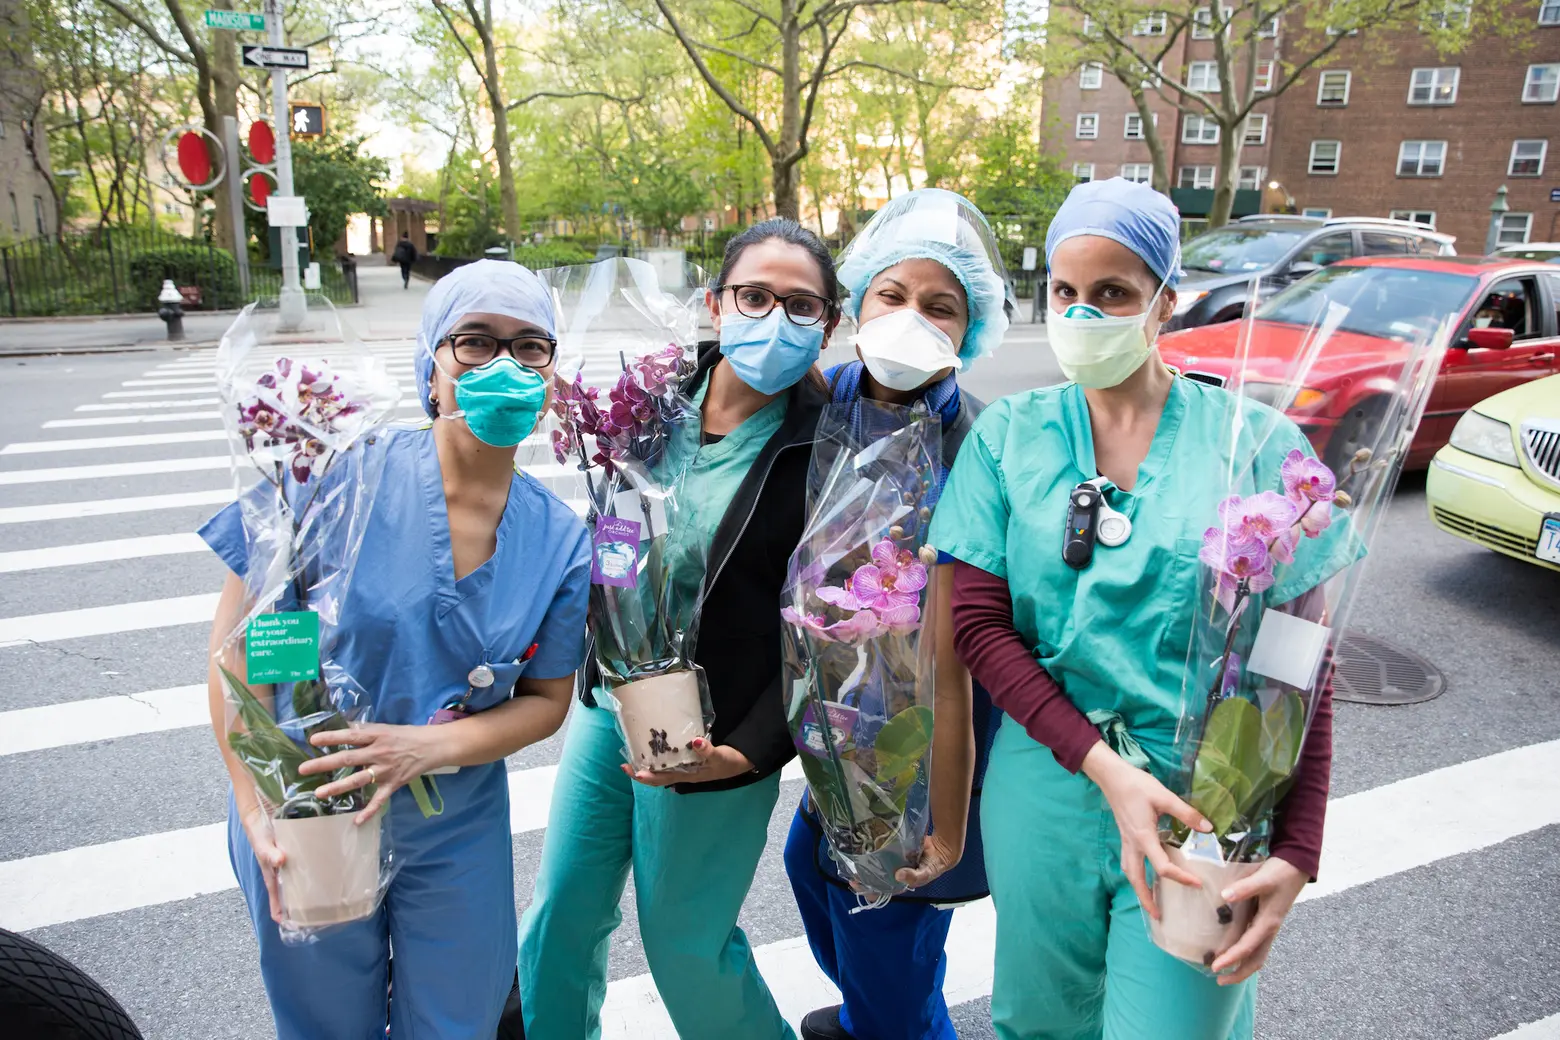 The Sill is delivering 10,000 orchids to healthcare workers for Mother’s Day